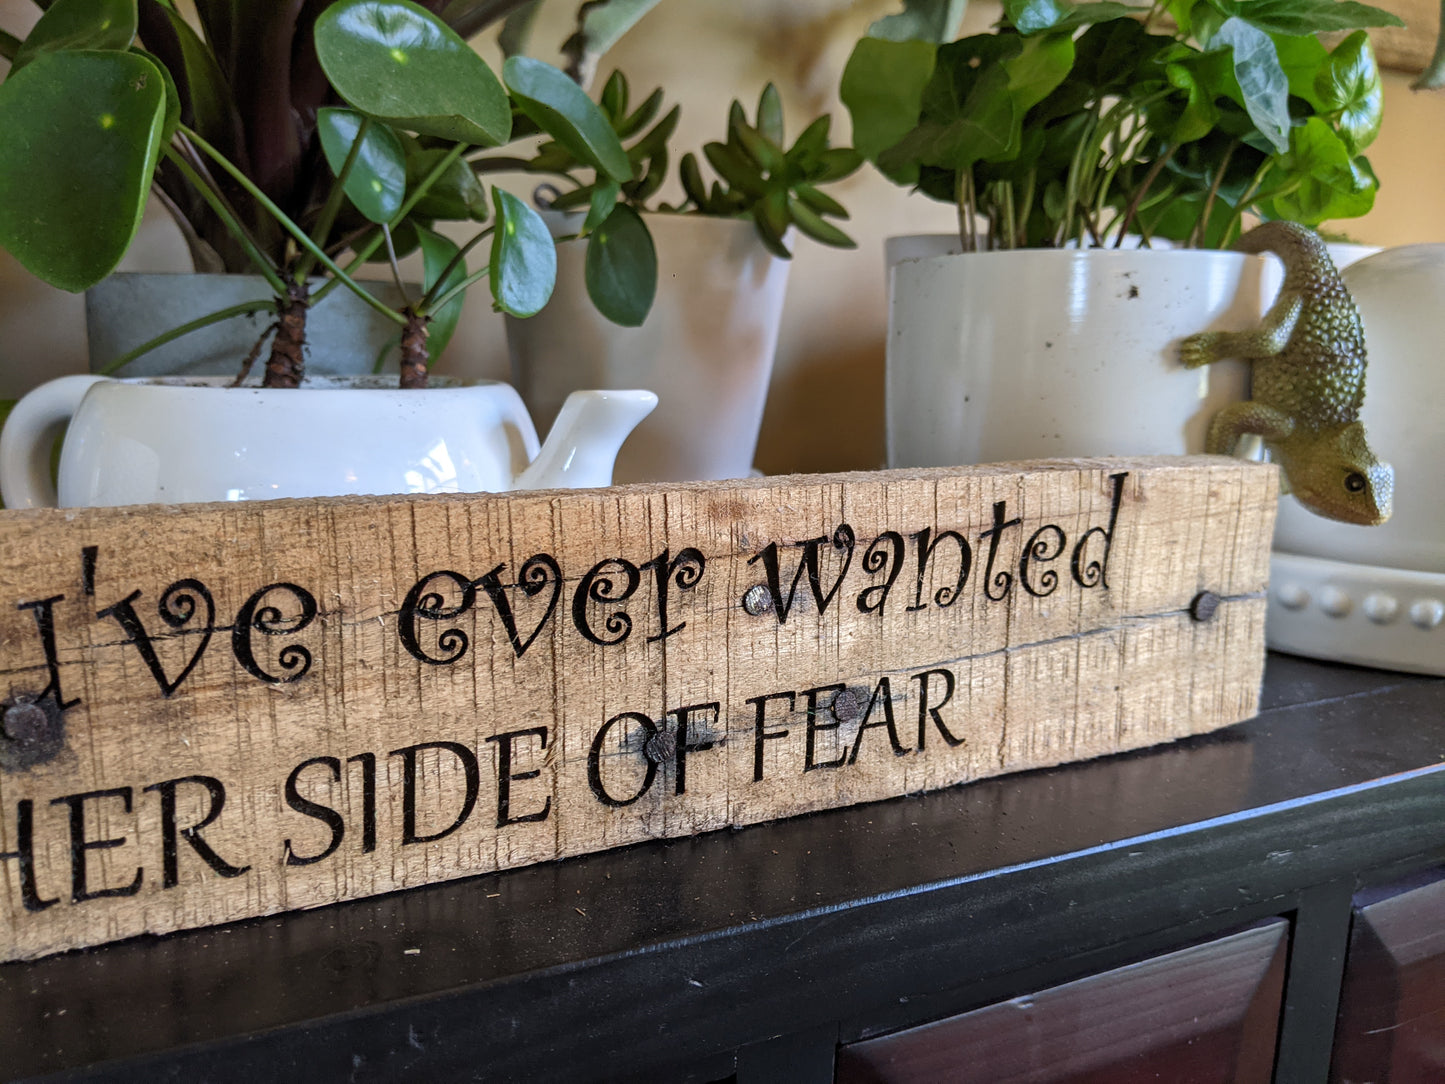 Other side of fear quote wood sign